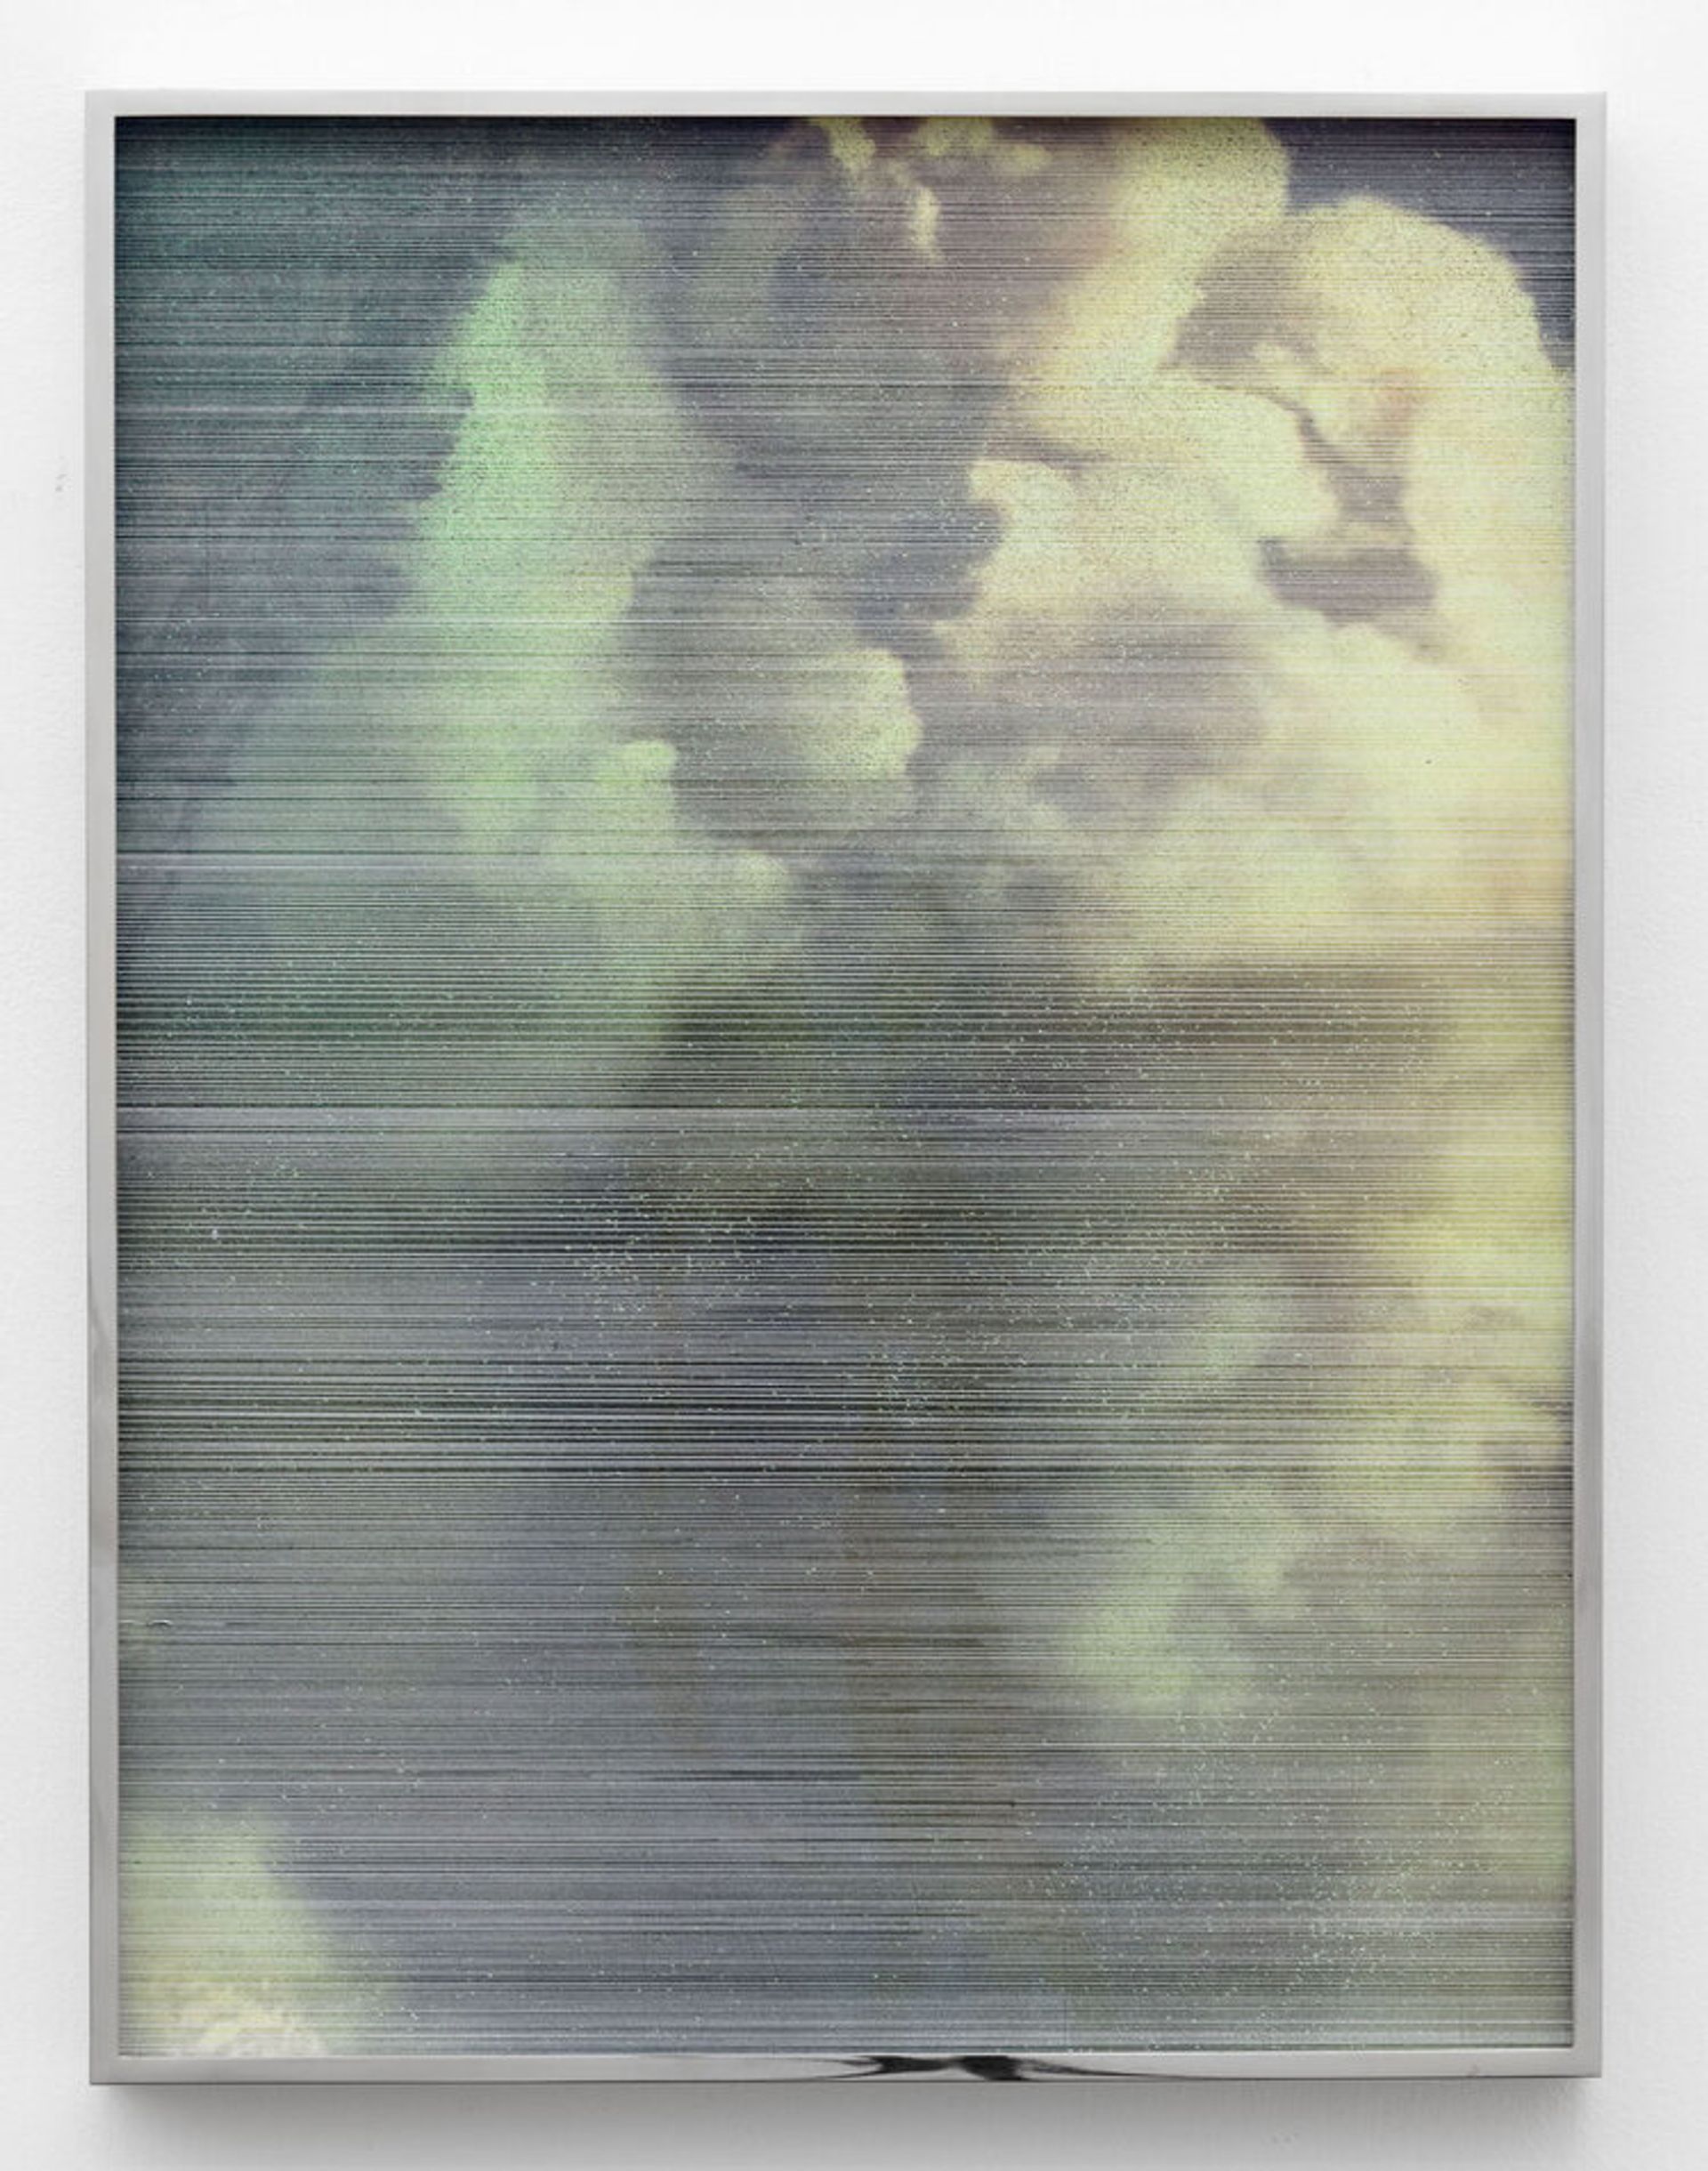 Anna Vogel, Clouds, 2019, lacquer on pigment print, scratched, framed in polished chrome, artglass, 54 × 51 cm
